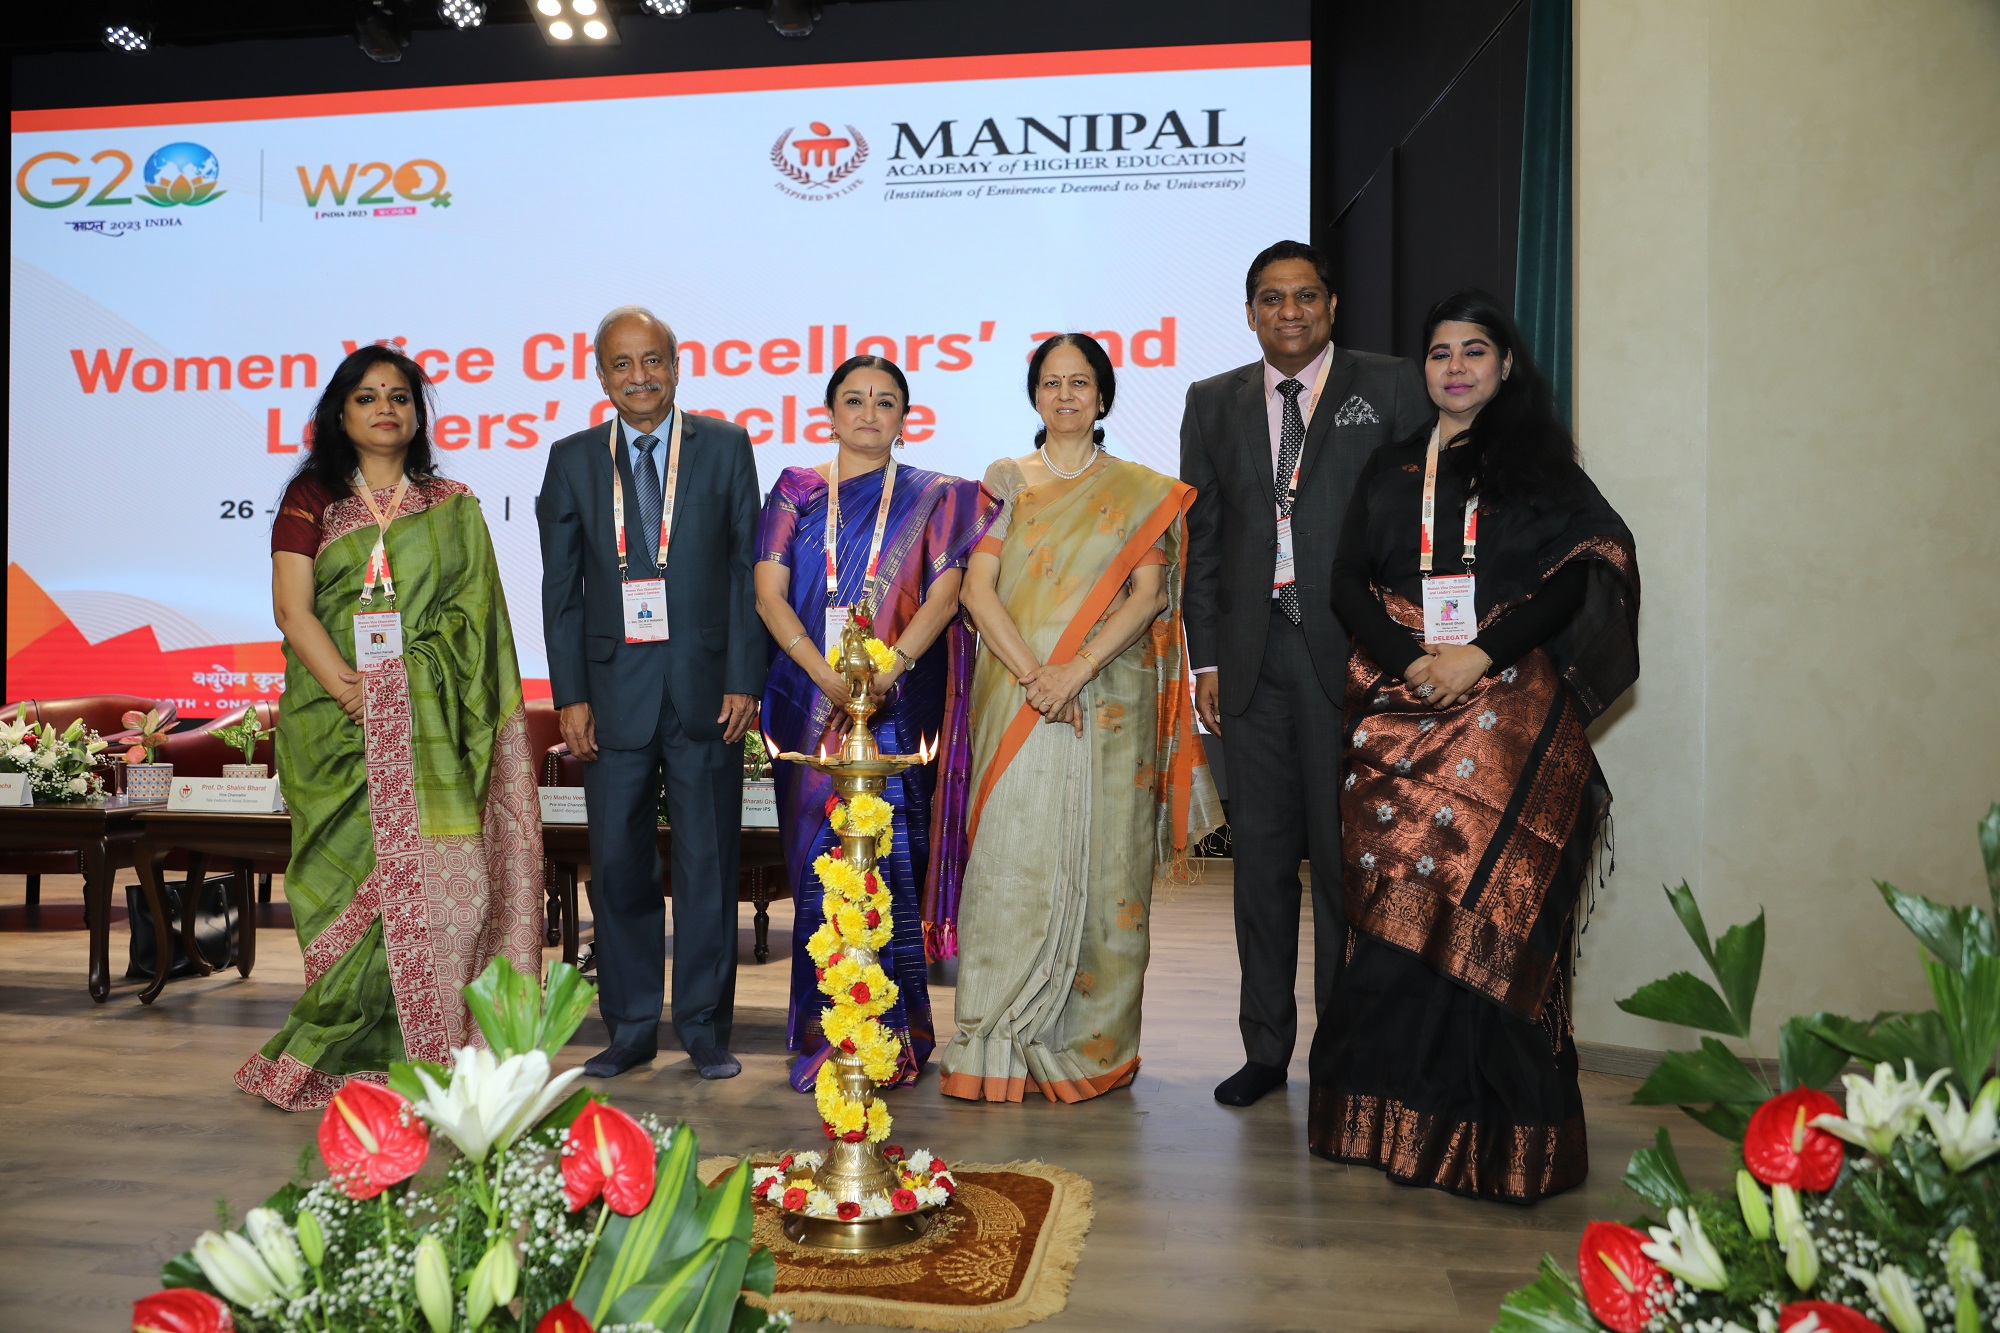 W20-MAHE Women Vice Chancellors' and Leaders' Conclave” Unveiled at MAHE Bengaluru focusing on Women-led Development | Campusvarta